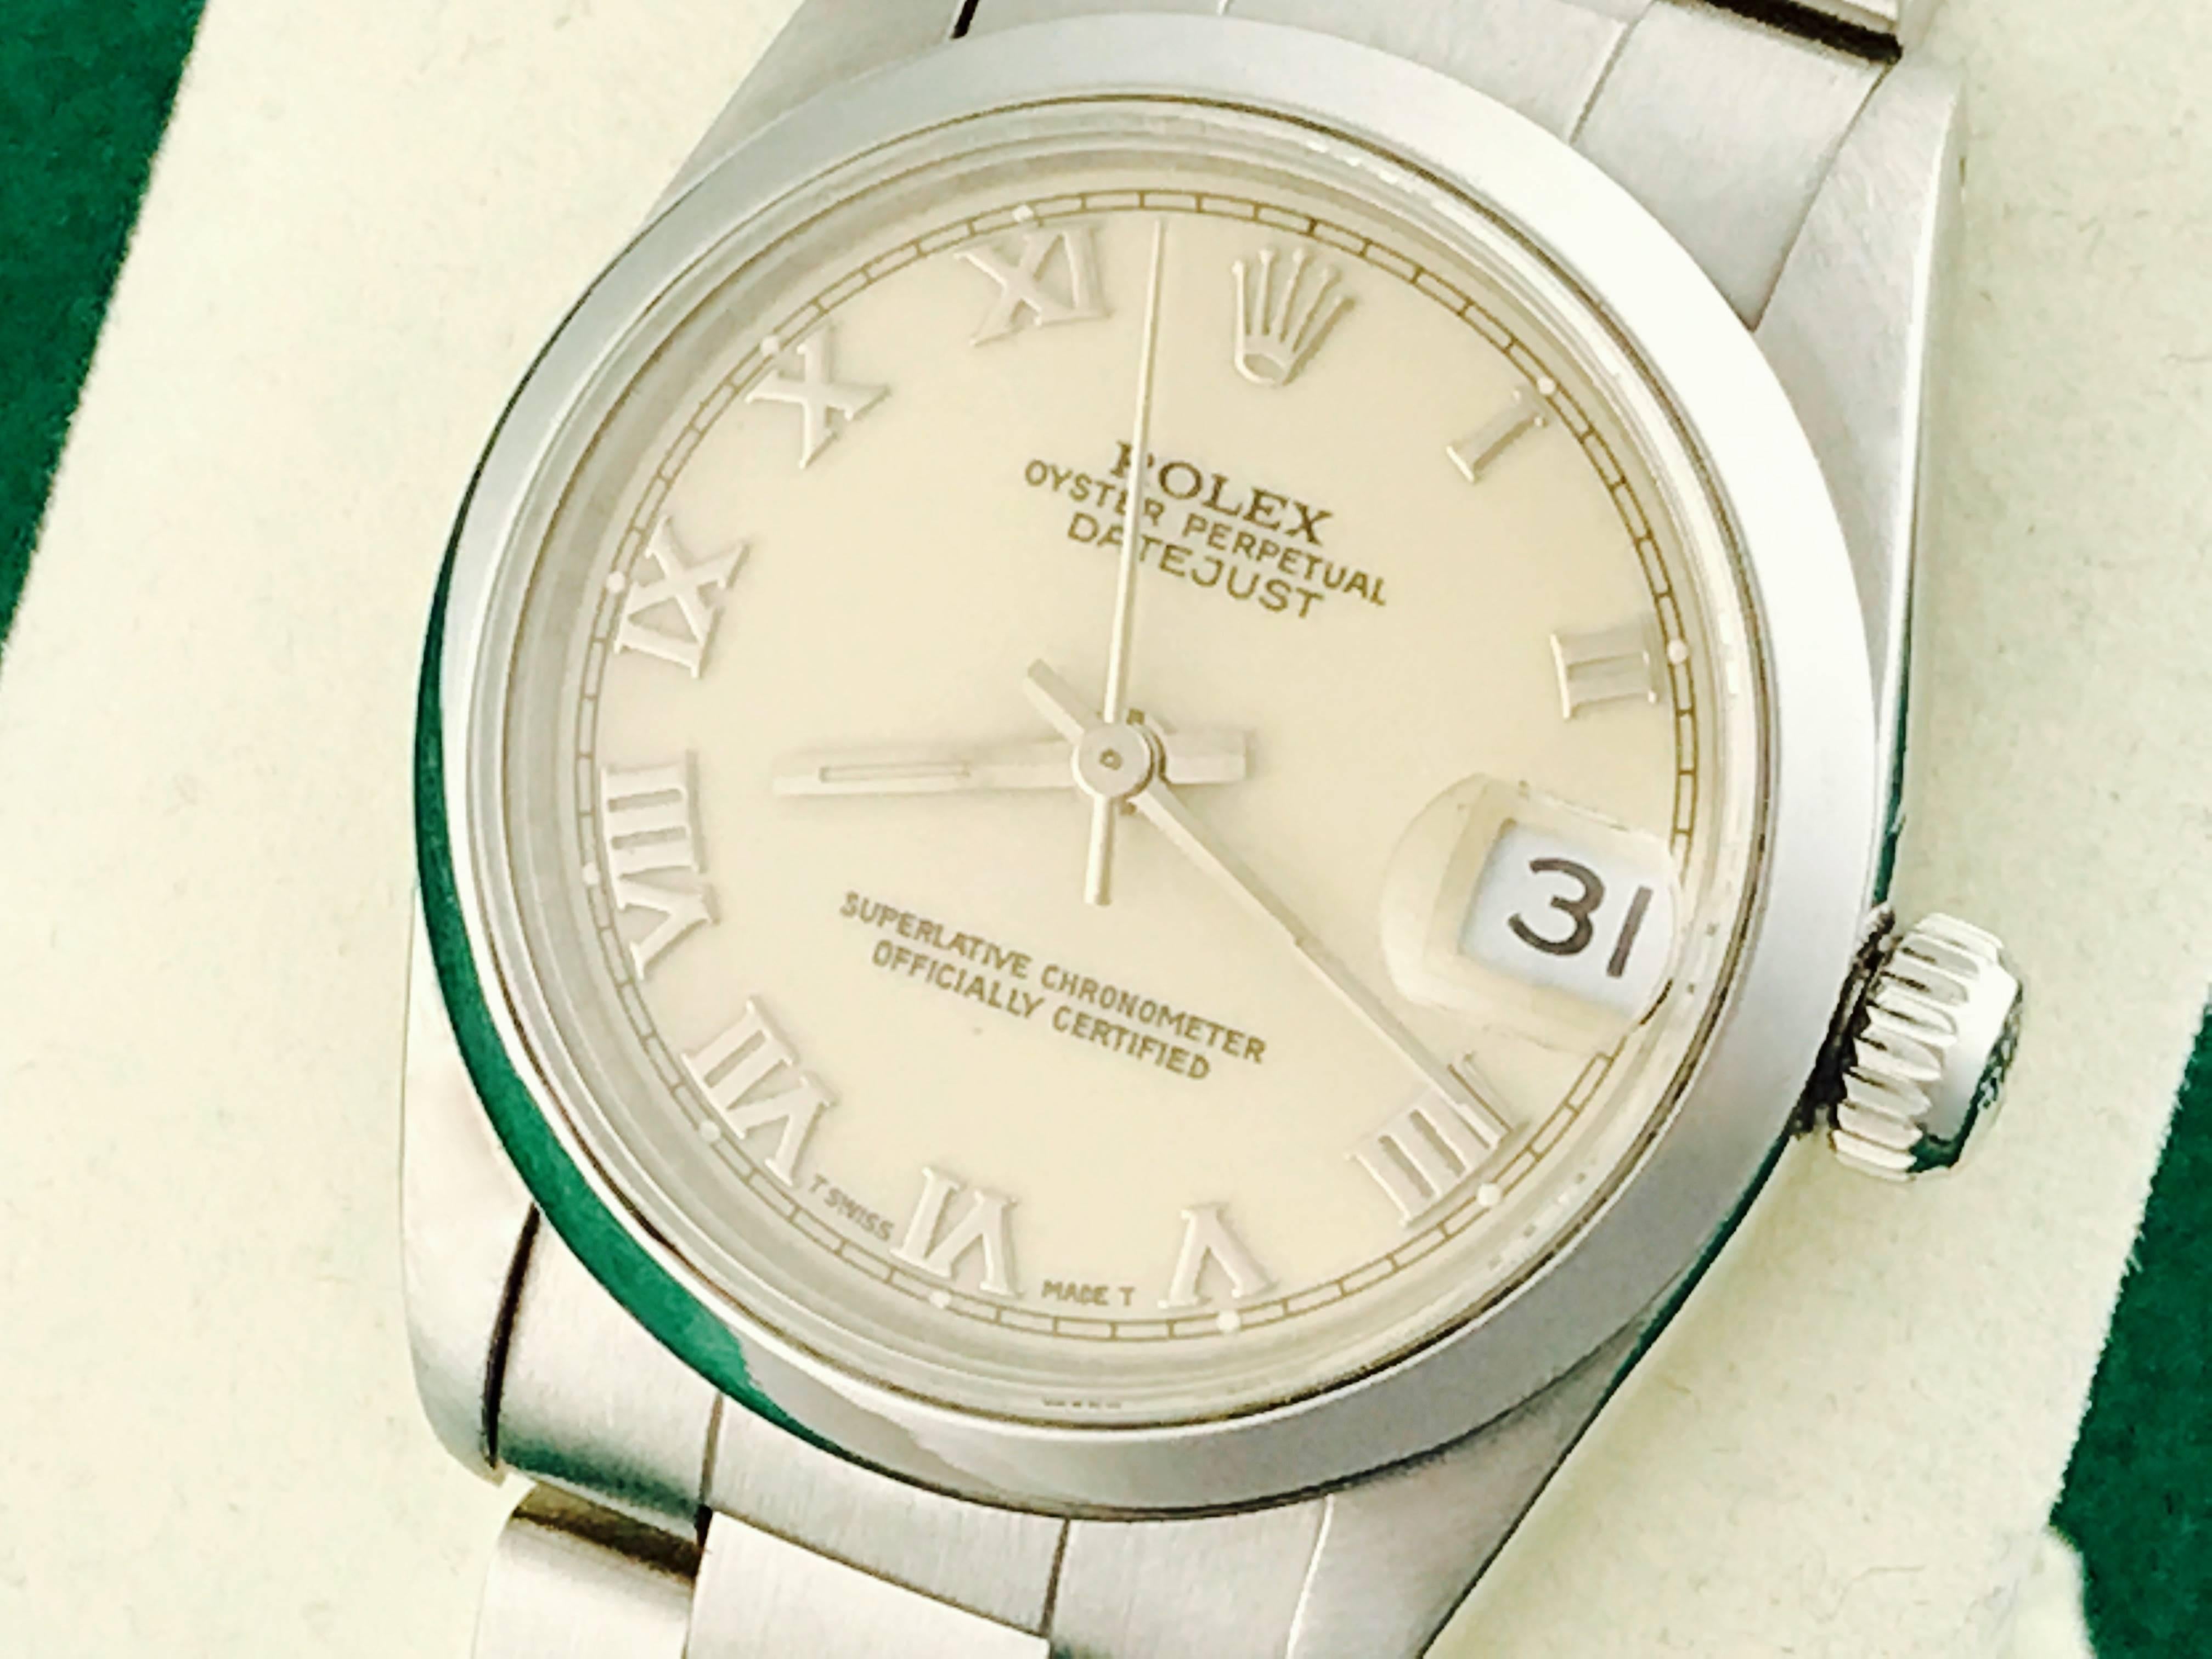 Rolex Datejust Model 68240 Stainless Steel Automatic Midsize Wrist Watch. Certified pre-owned and ready to ship.  Stainless Steel case with smooth bezel, 30mm diameter.  Stainless Steel oyster bracelet. Ivory dial with polished Roman numerals.  Box,